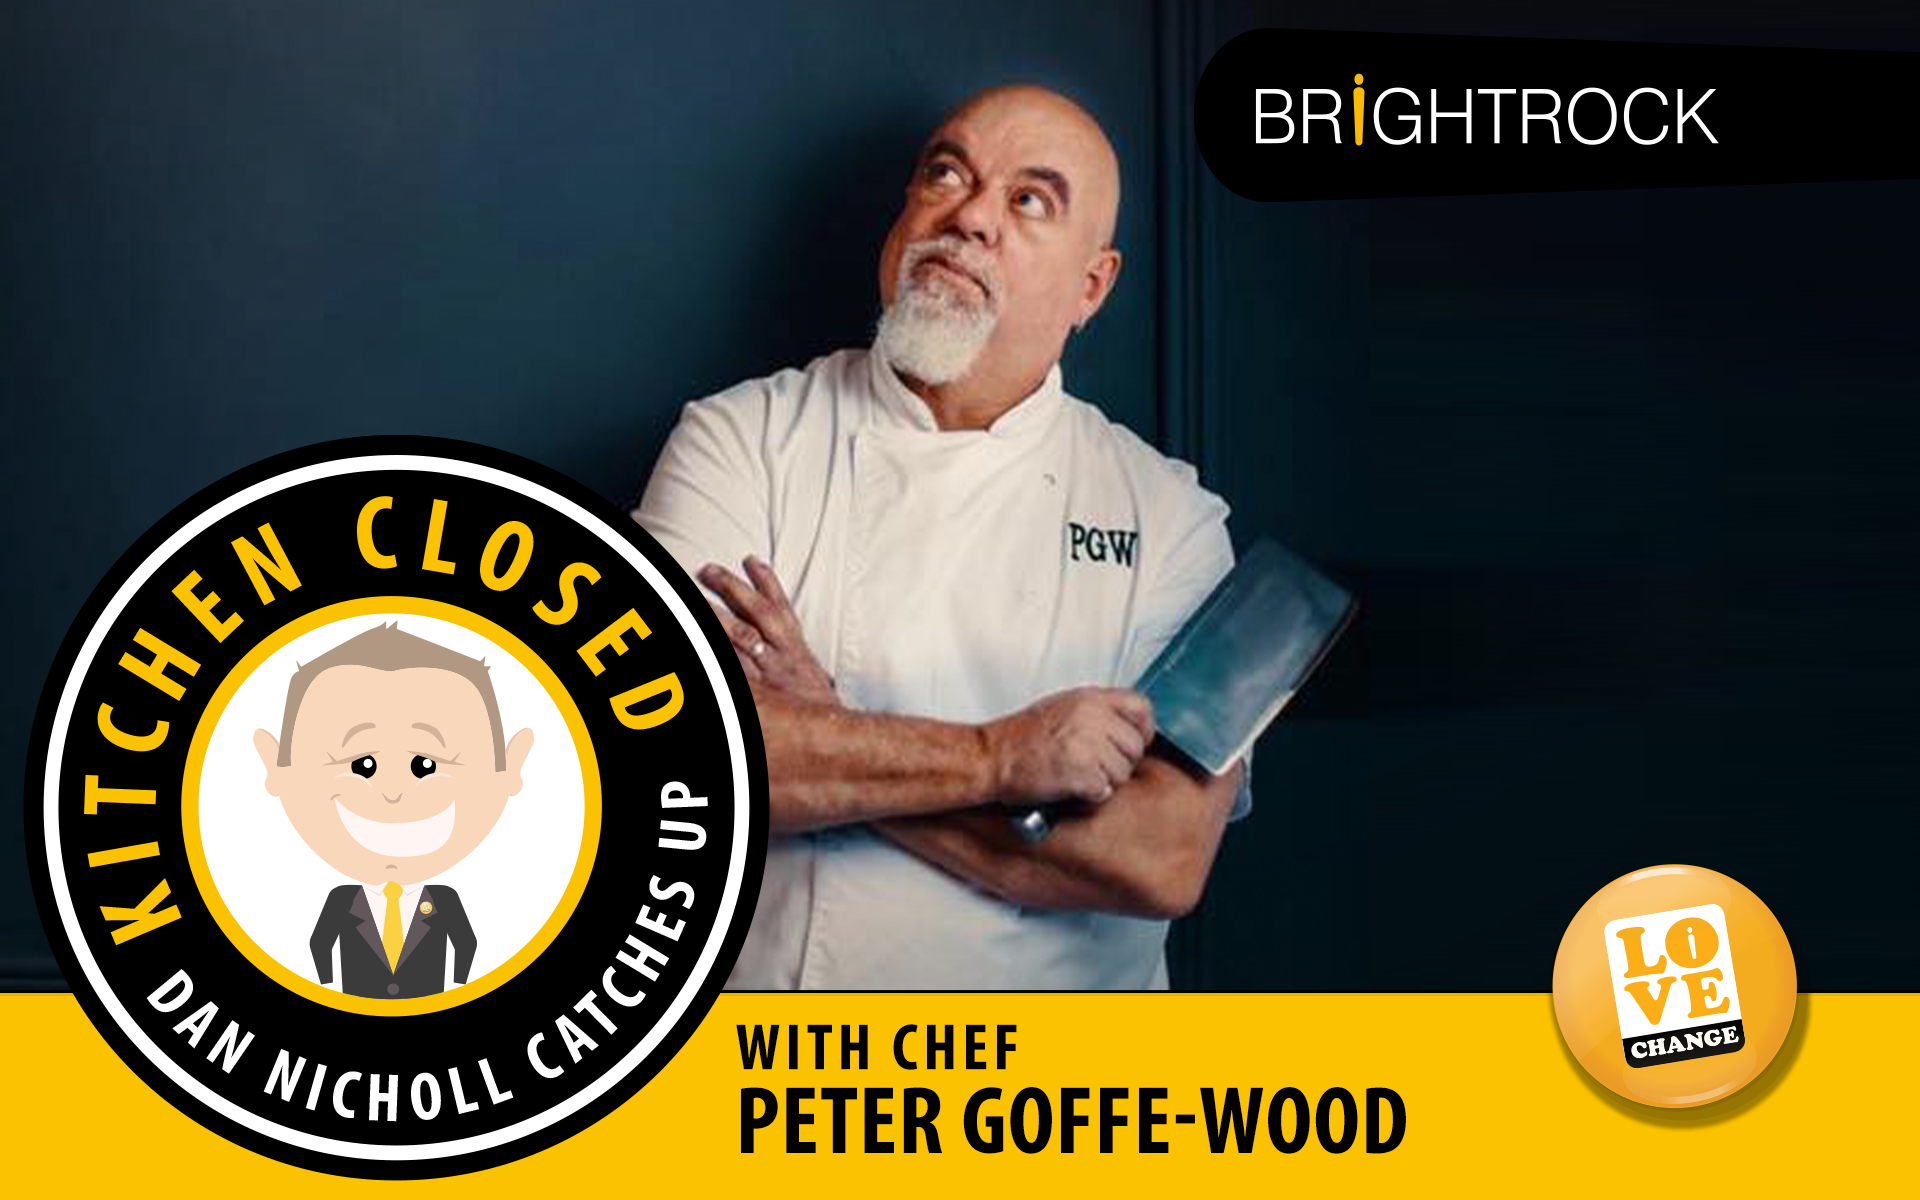 Kitchen Closed: Dan Nicholl catches up with Chef Peter Goffe-Wood